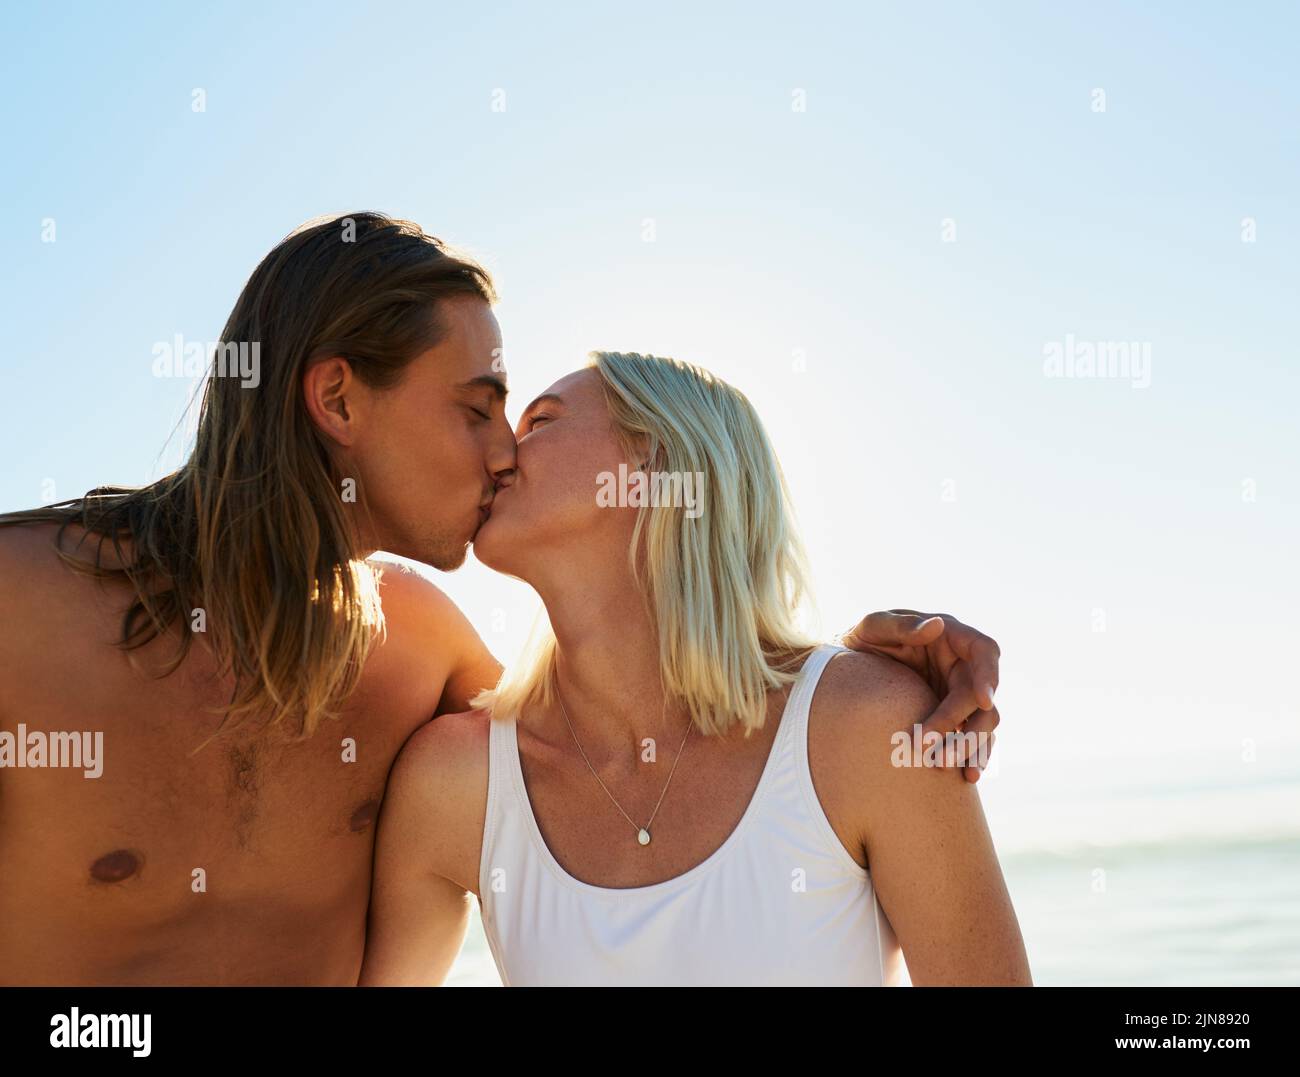 Our love is all that counts. an affectionate young couple kissing each other at the beach. Stock Photo